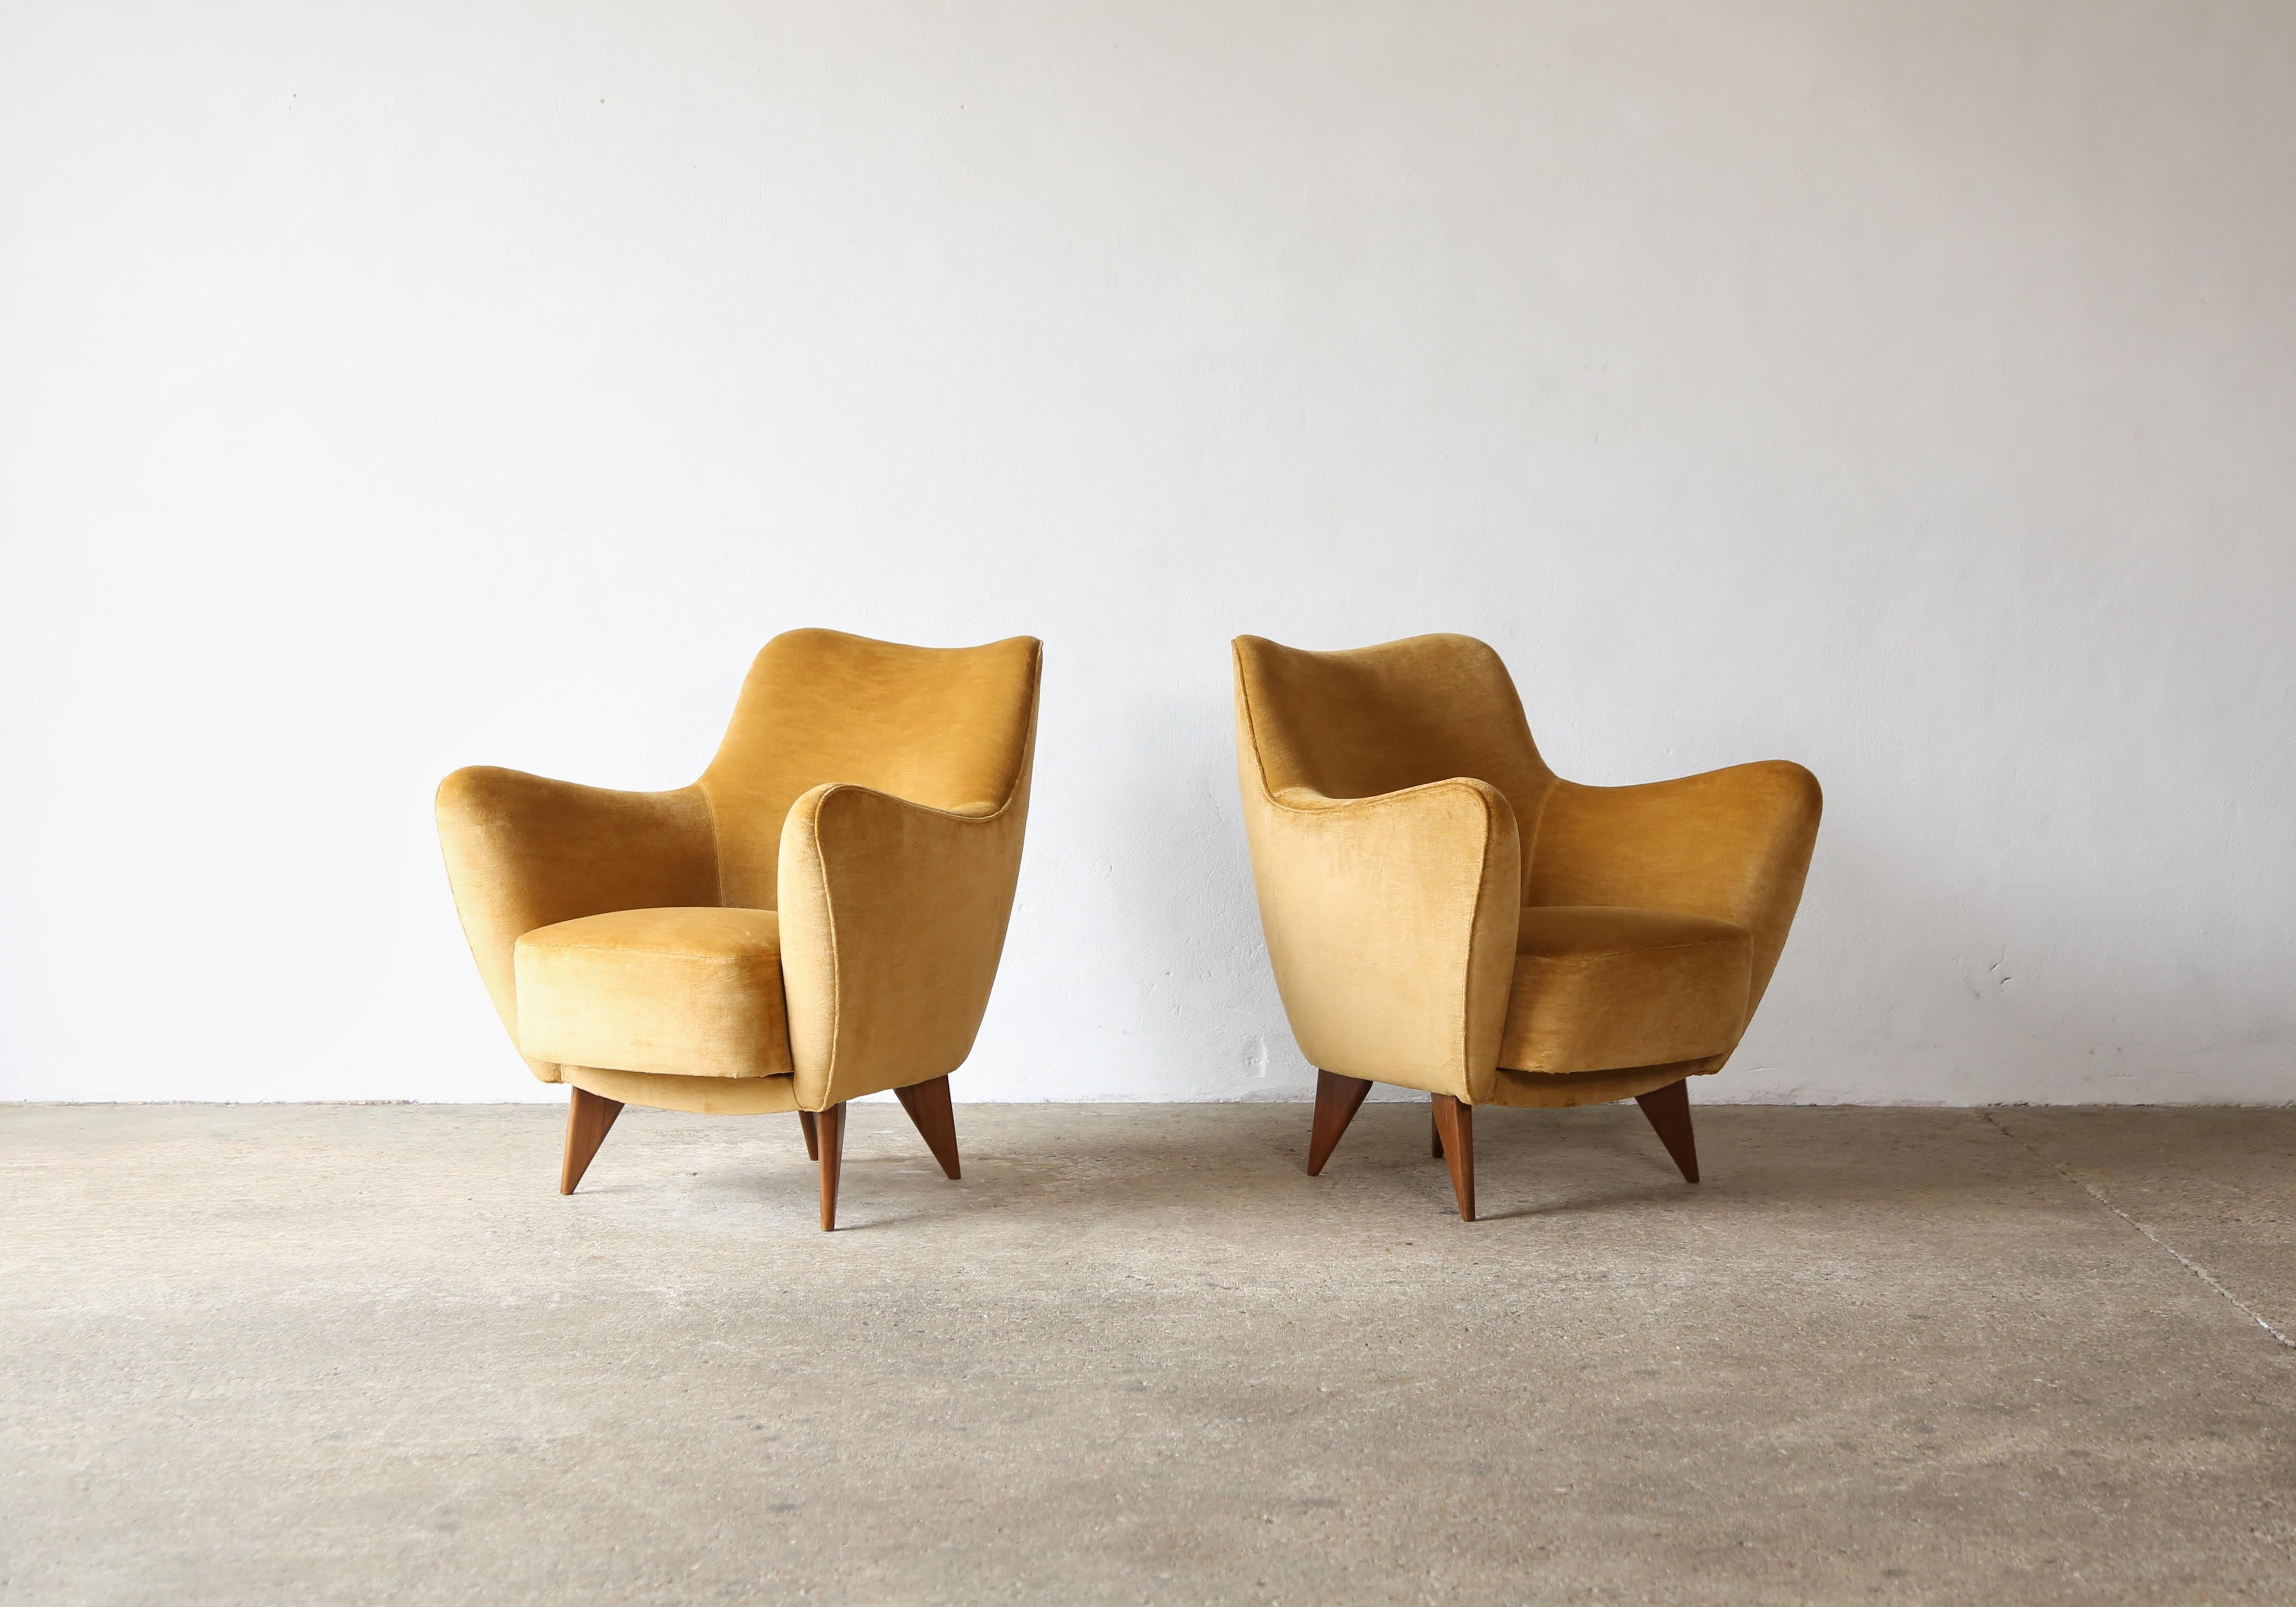 A lovely pair of Giulia Veronesi Perla armchairs, I.S.A. Bergamo, Italy, 1950s.   Newly upholstered in a textured golden yellow velvet.   Fast shipping worldwide.

